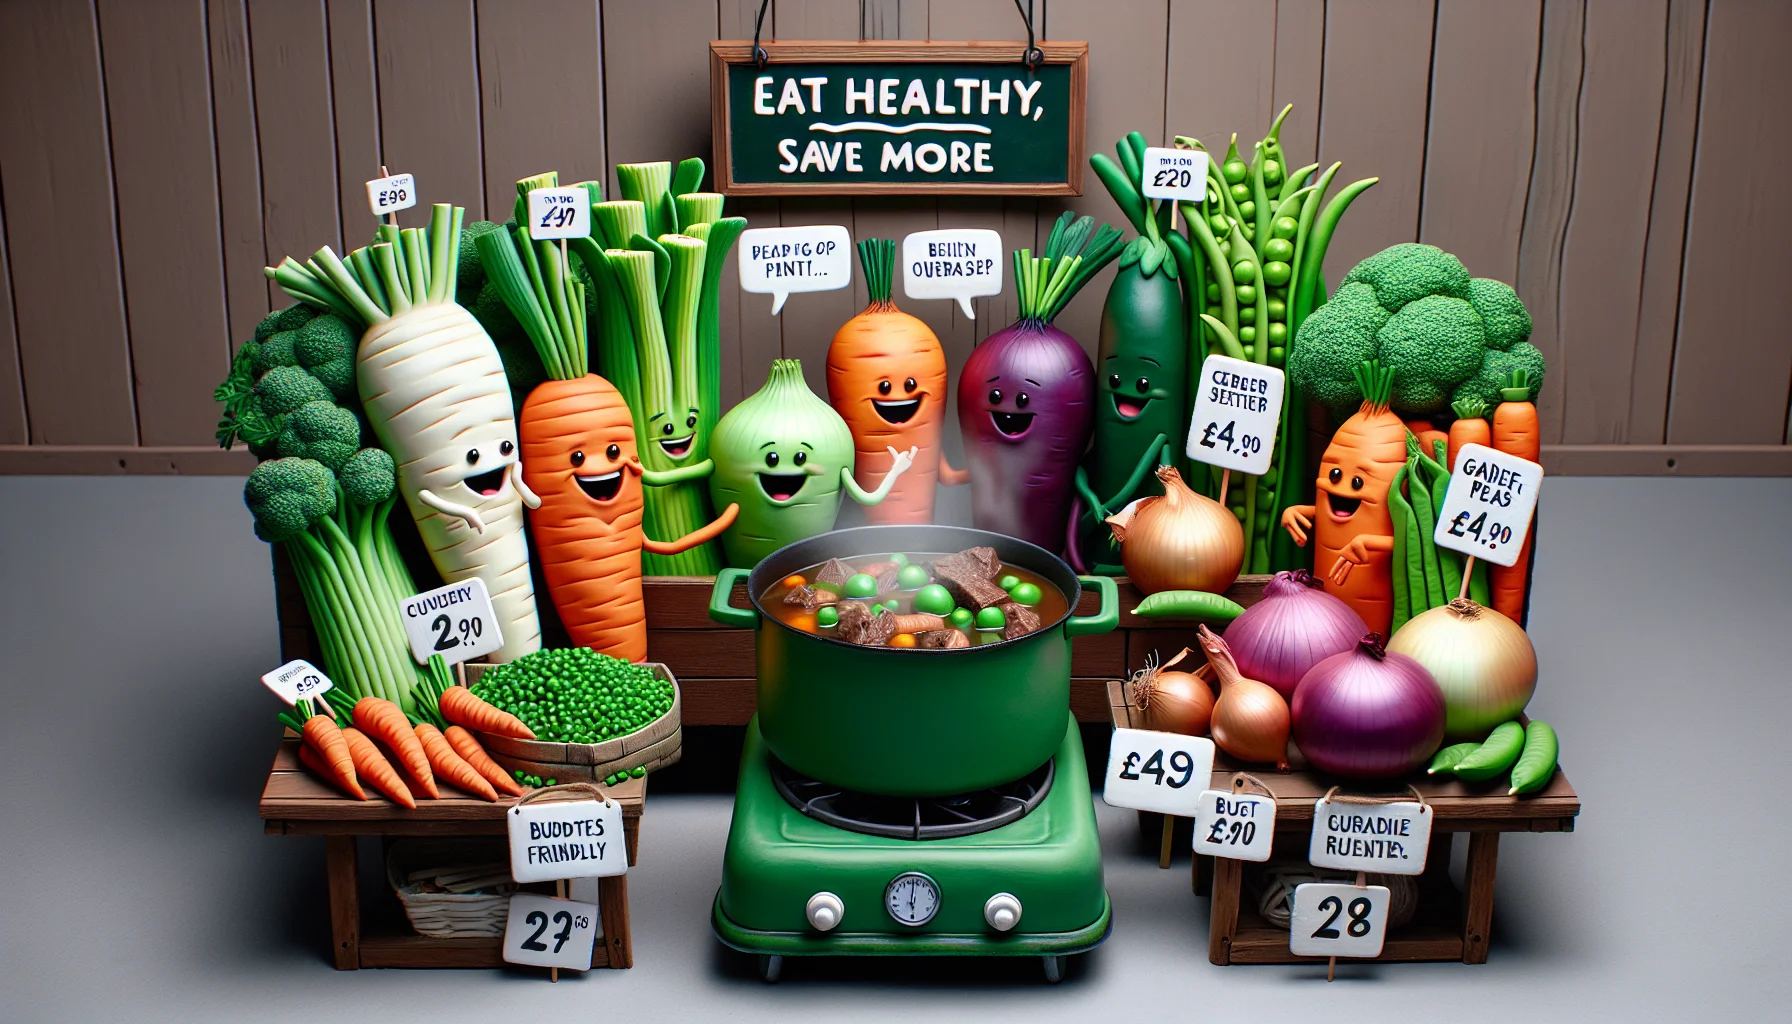 Imagine a humorous scenario set in a farmer's market. A vibrant display of fresh, colorful vegetables like carrots, celery, onions, and garden peas is arranged with small price tags that read 'budget-friendly'. These vegetables are chatting excitedly about a delicious and nutritious pot of beef stew bubbling nearby on a green vintage stove. Their friendly cartoon-like facial expressions make them seem inviting. A sign hangs over them with the appealing slogan, 'Eat healthy, save more'. This picture blends fantasy with reality aim at enticing people to eat healthily for less money.